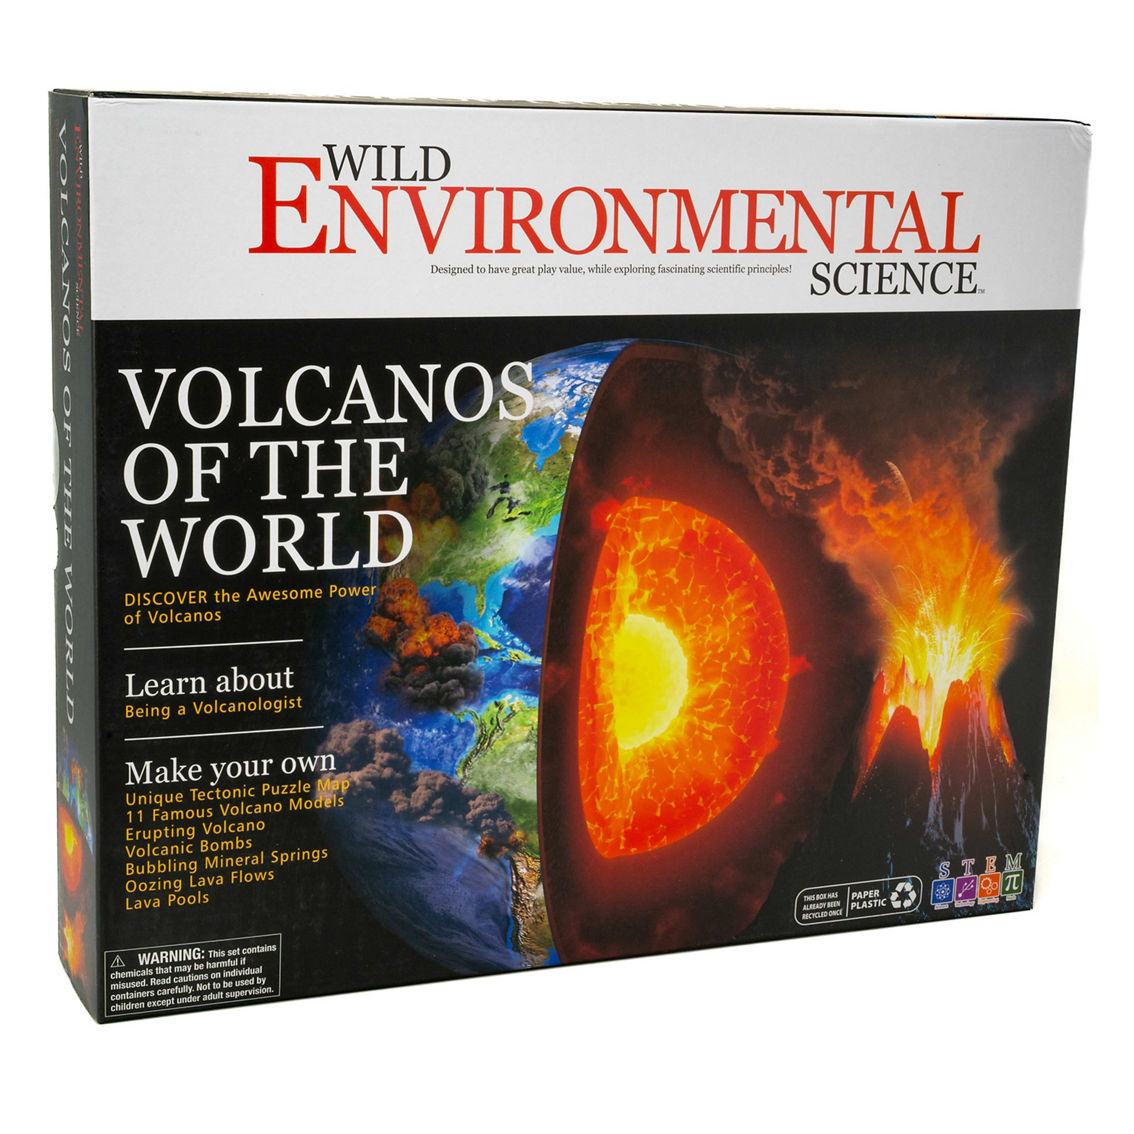 Wild Environmental Science - Volcanos of the World - Image 2 of 5